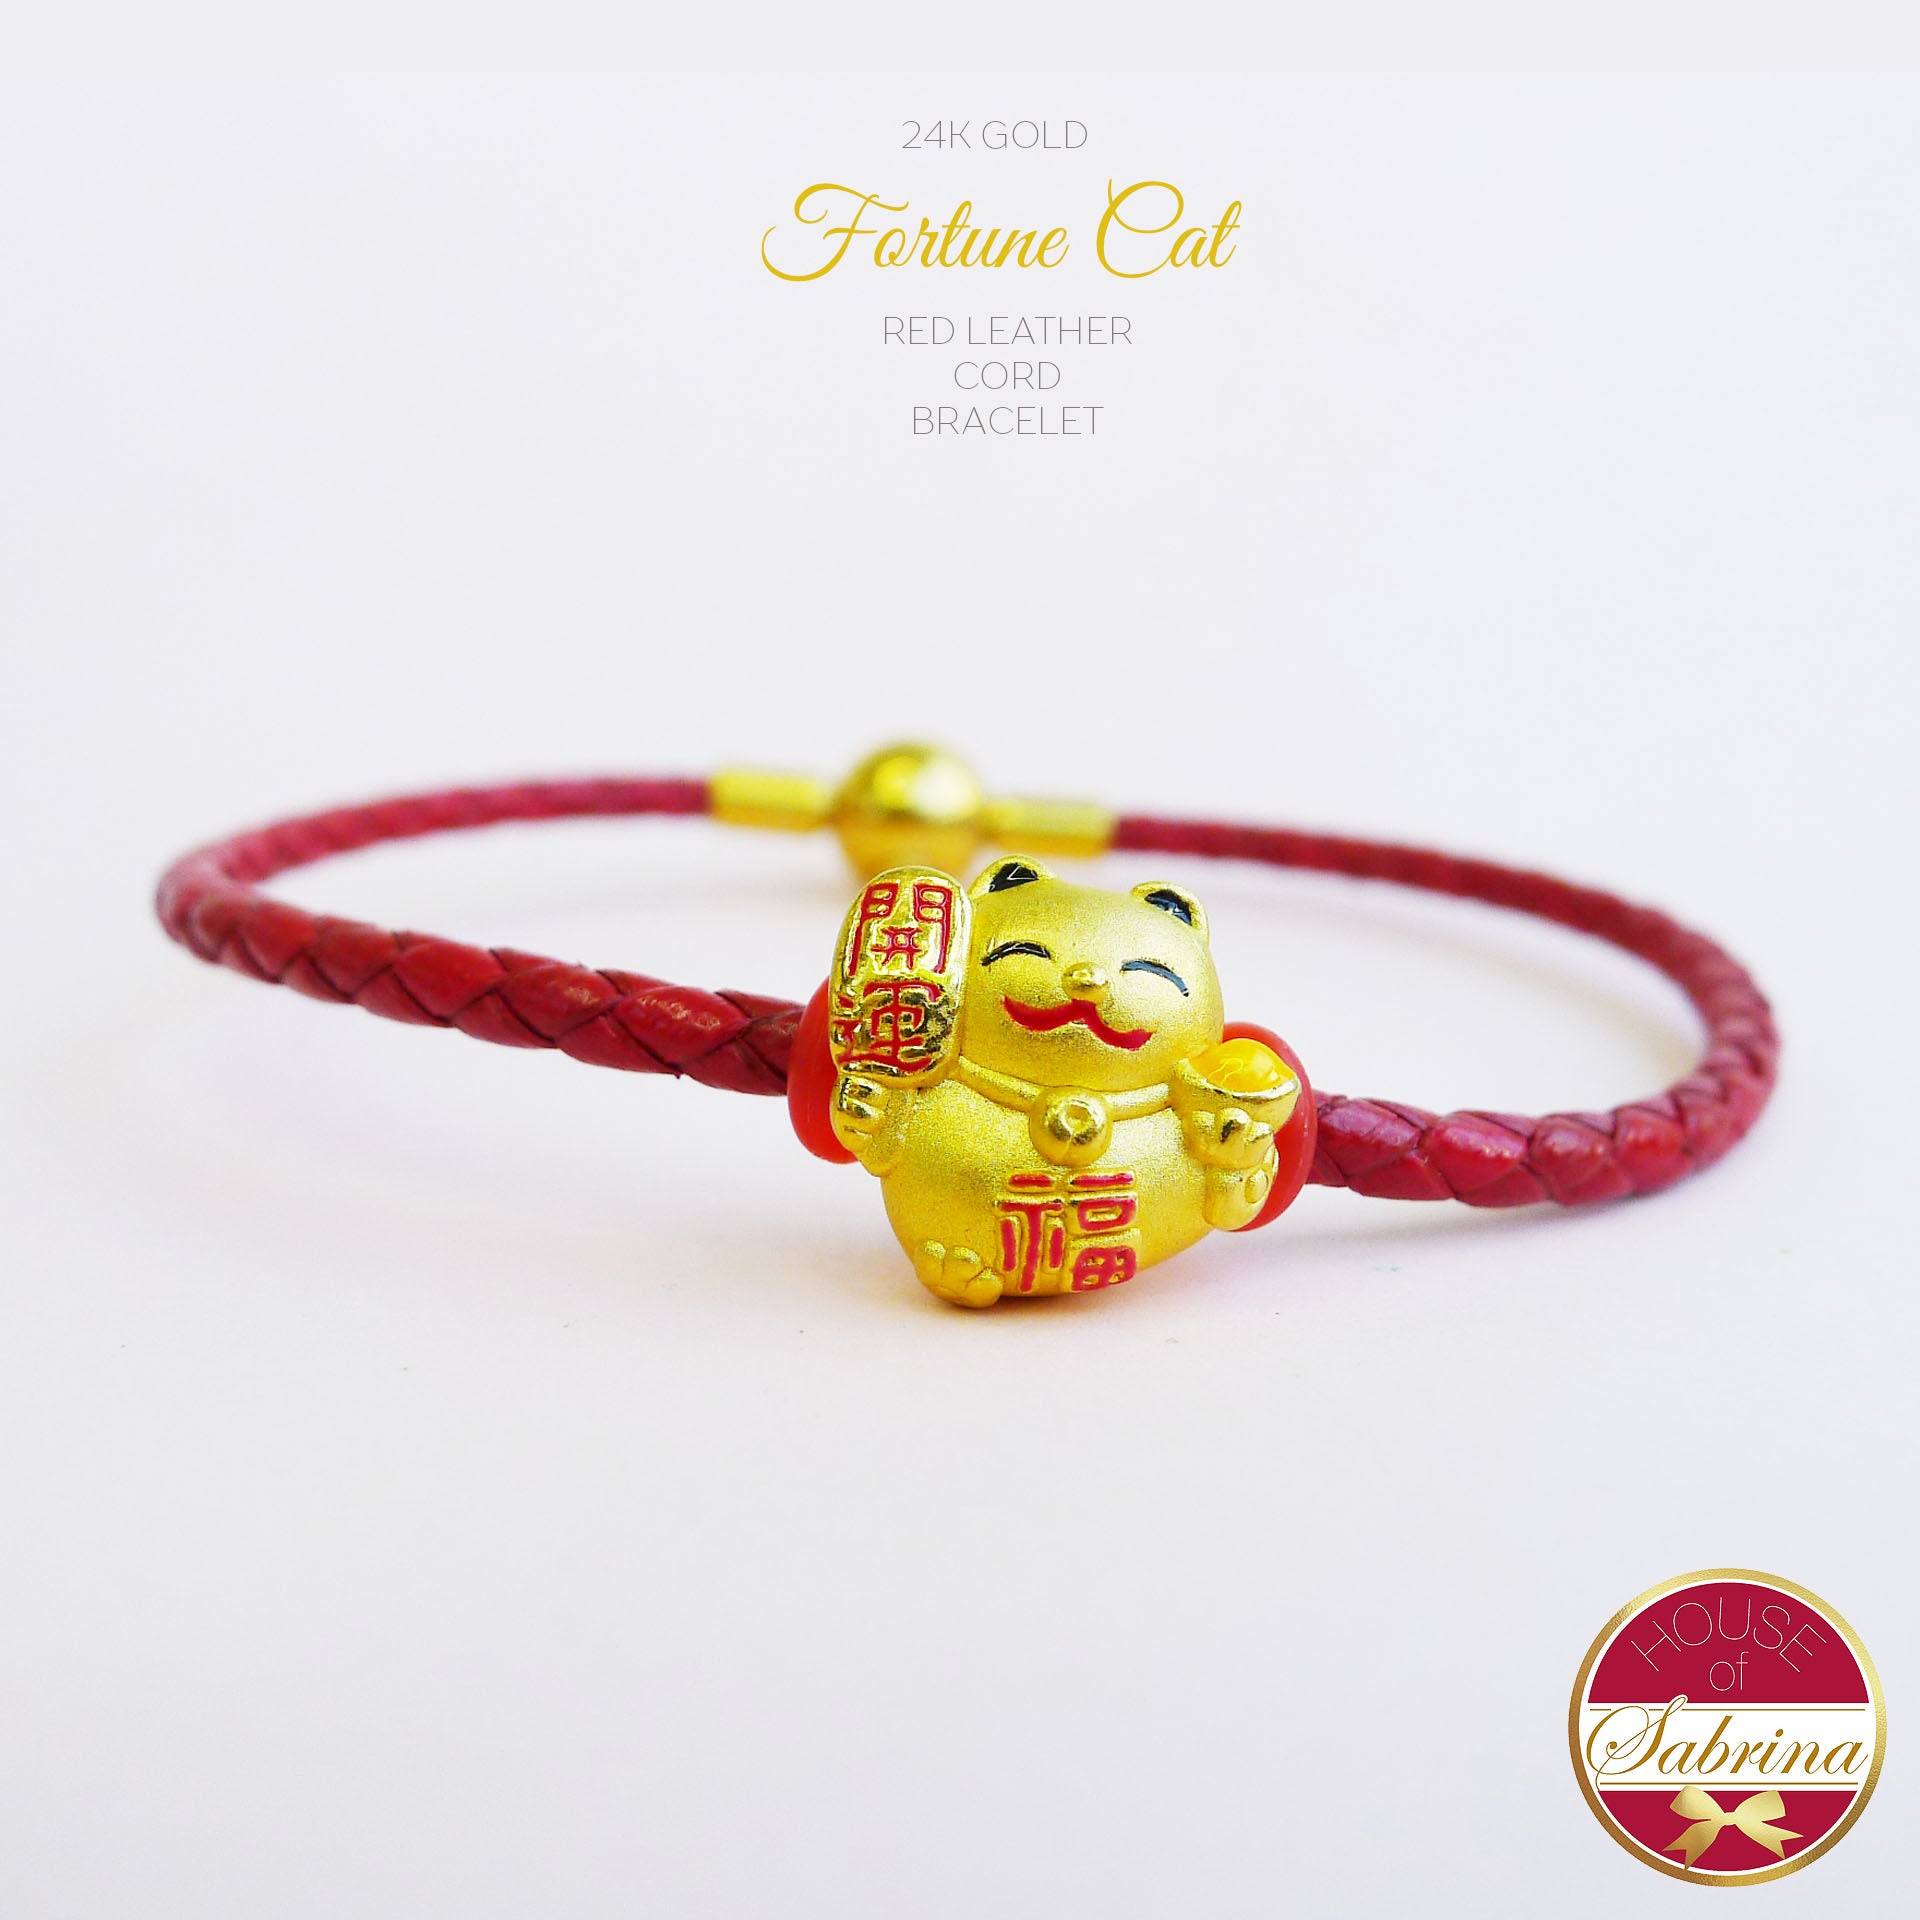 24K GOLD FORTUNE CAT ON RED LEATHER CORD BRACELET